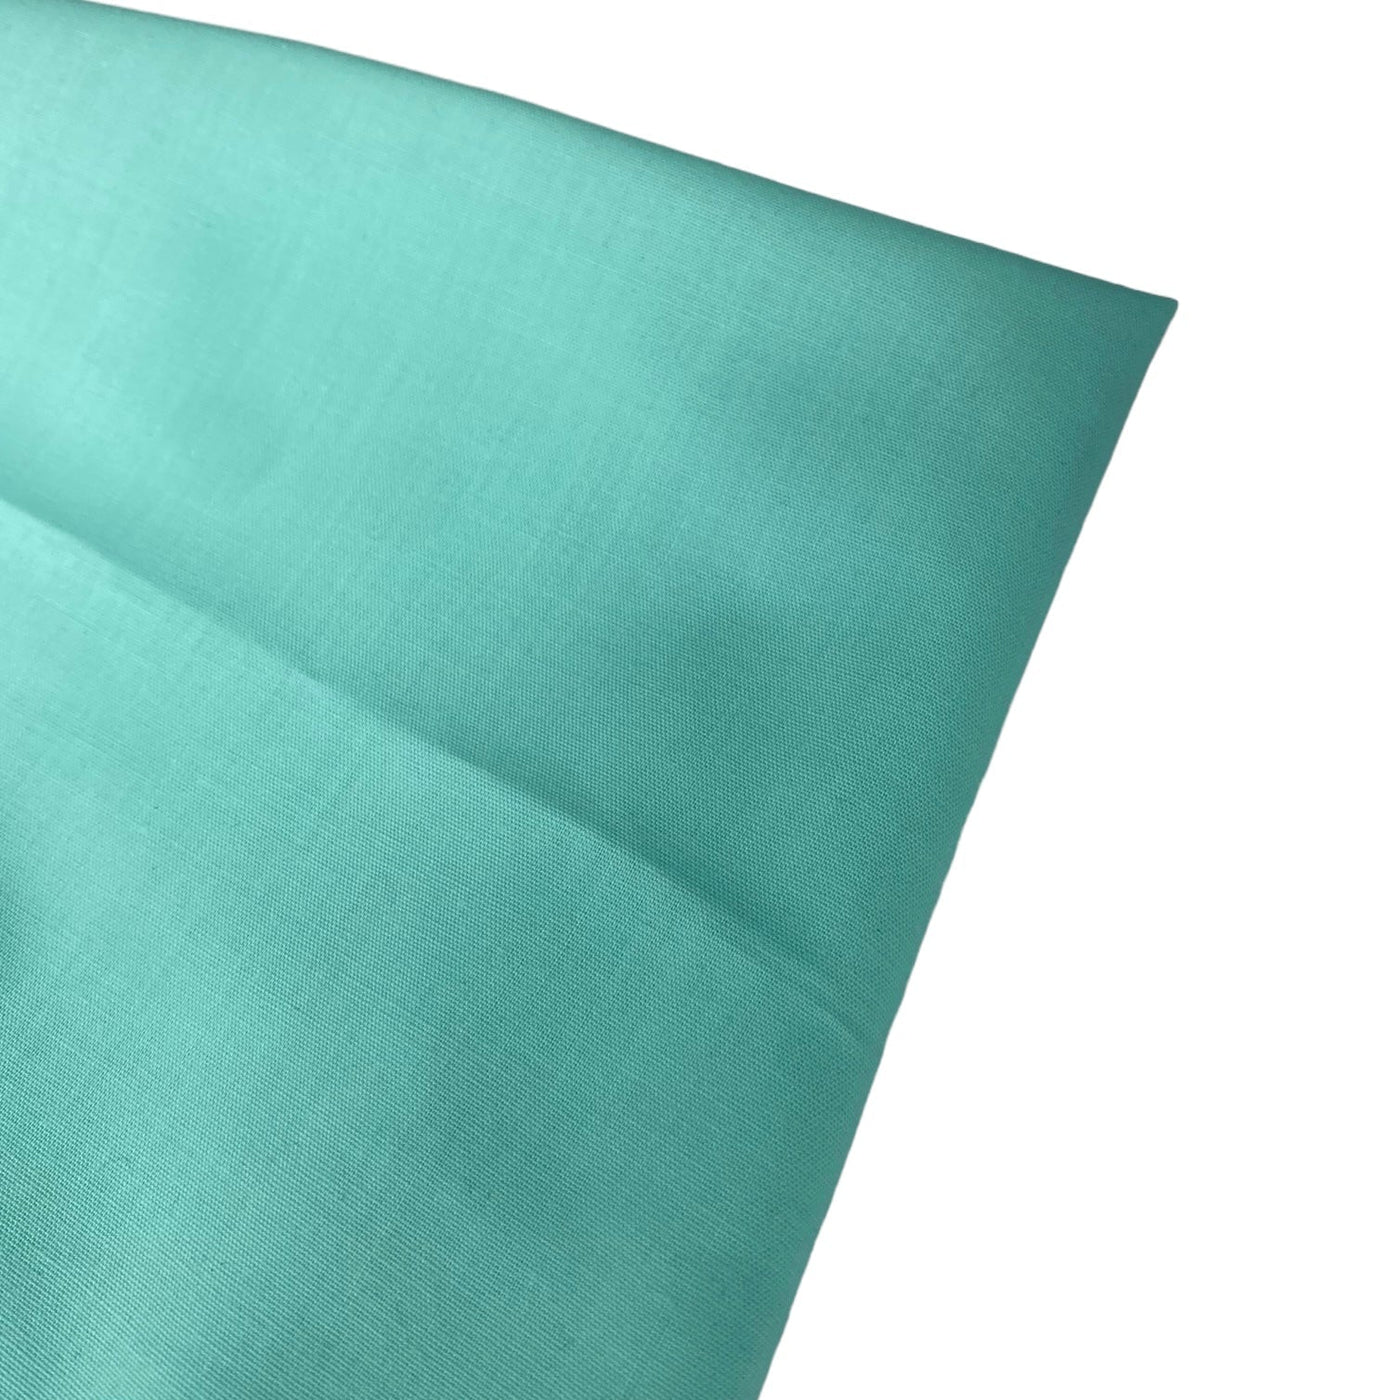 Polyester/Cotton Broadcloth - Blue